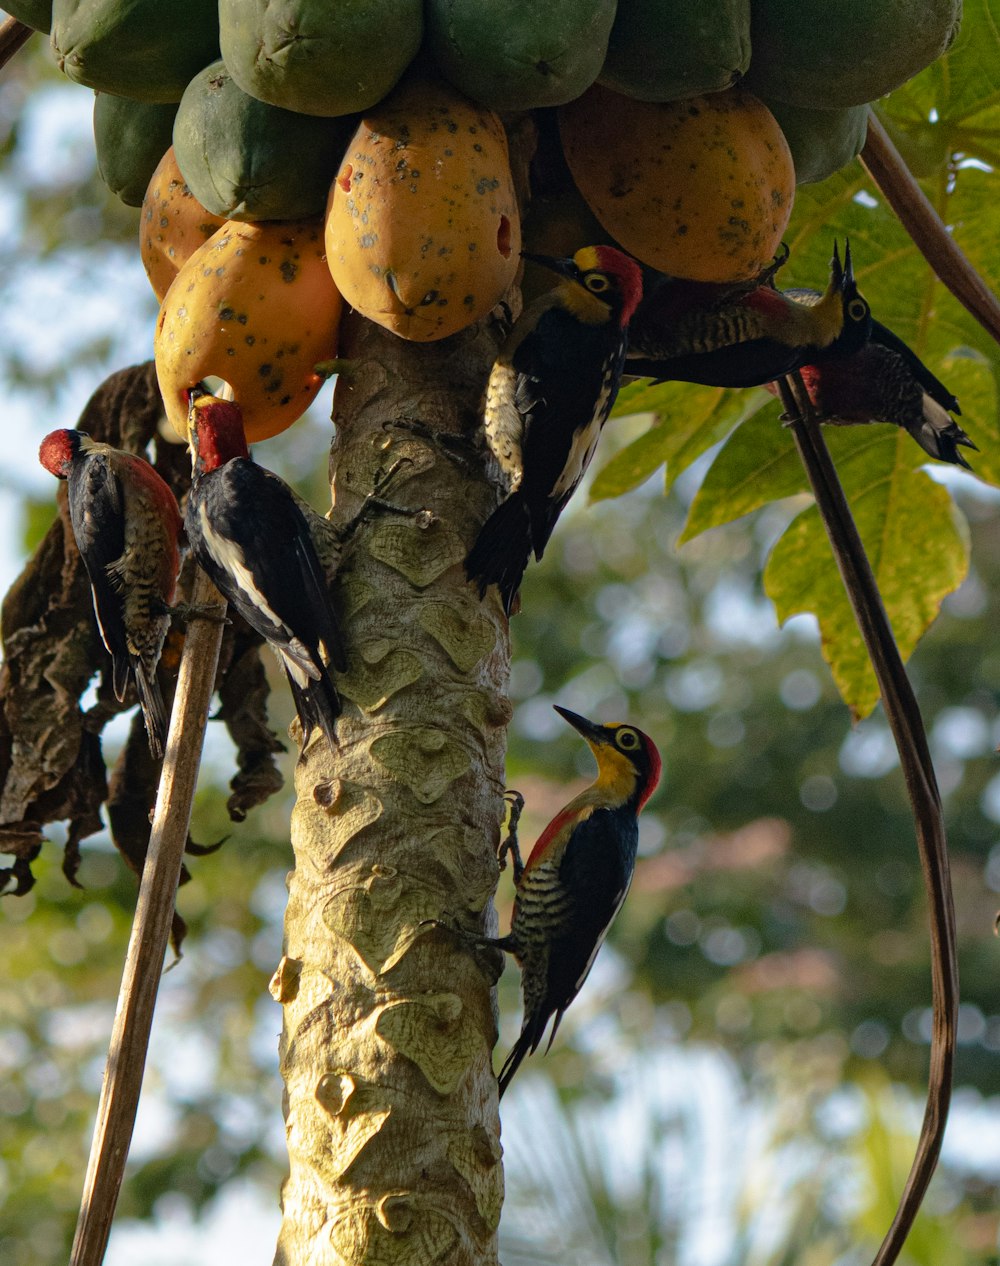 a bunch of fruit hanging from a tree